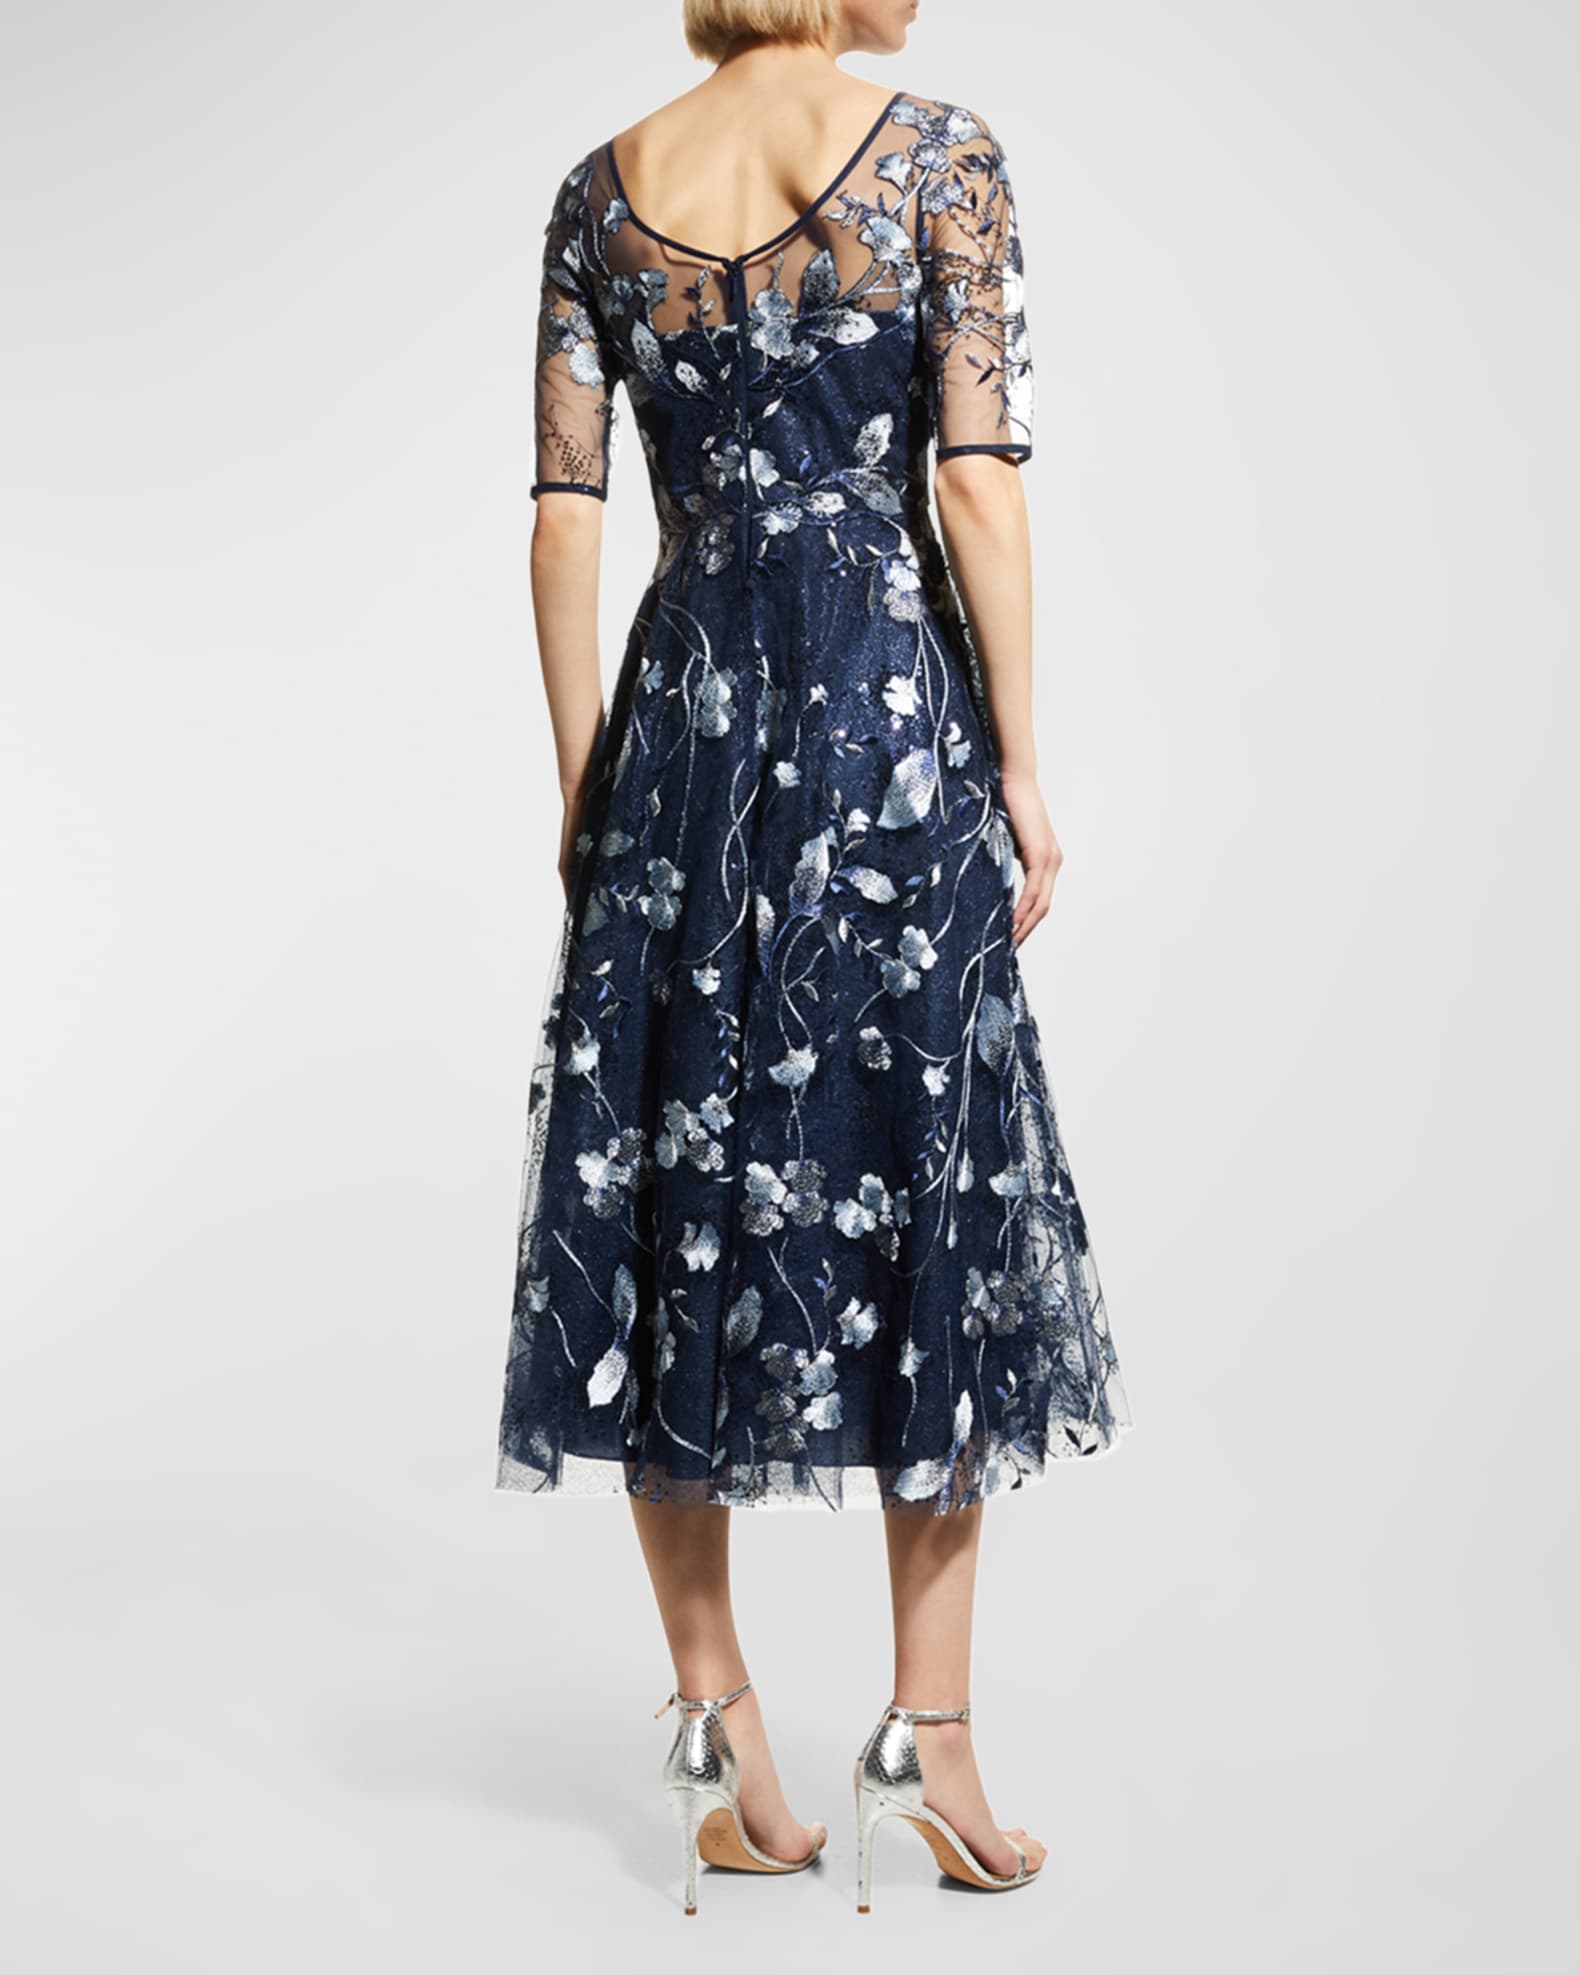 Rickie Freeman for Teri Jon Floral-Embroidered Tulle Cocktail Dress ...